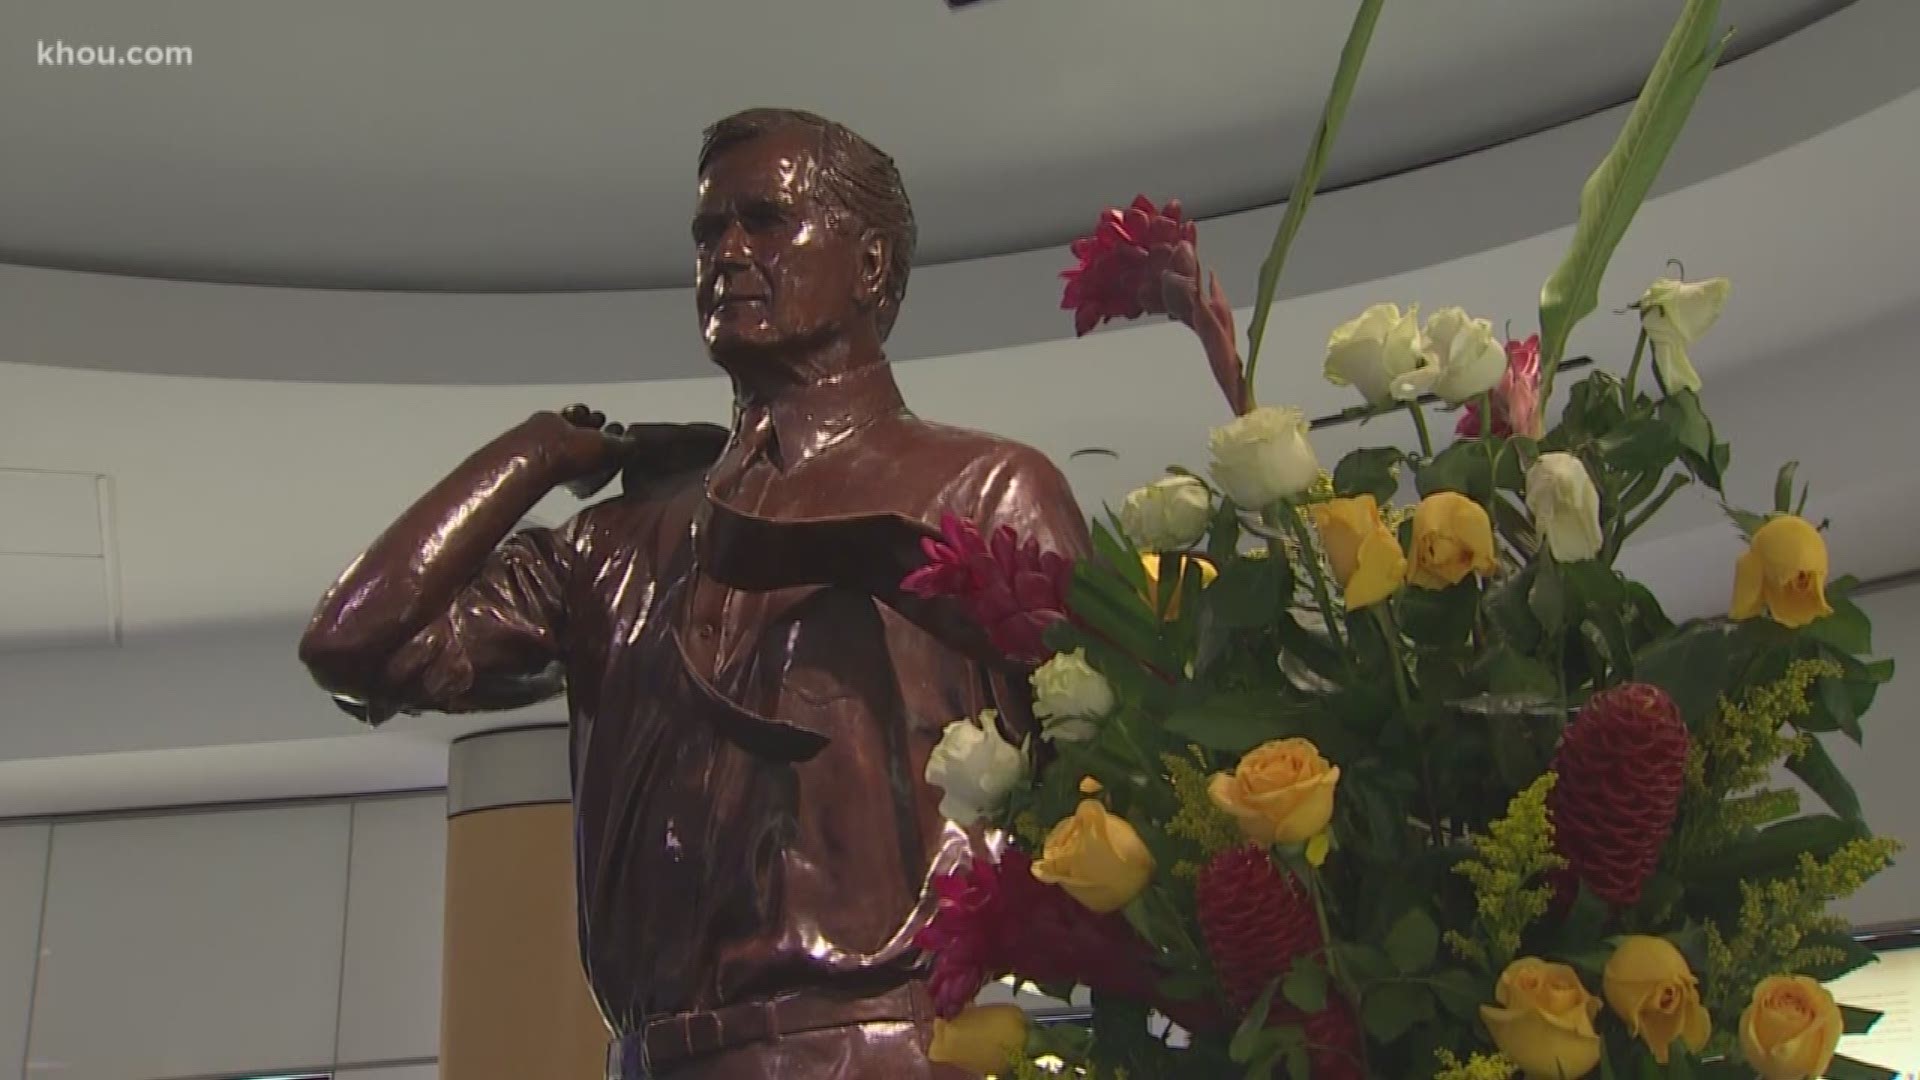 It's hard to miss the name George Bush as you drive into Houston's big airport. Inside Terminal C, the 41st President's statue looms large surrounded by flowers. It's been there since 1997, but now his presence felt more than ever in the airport that bear